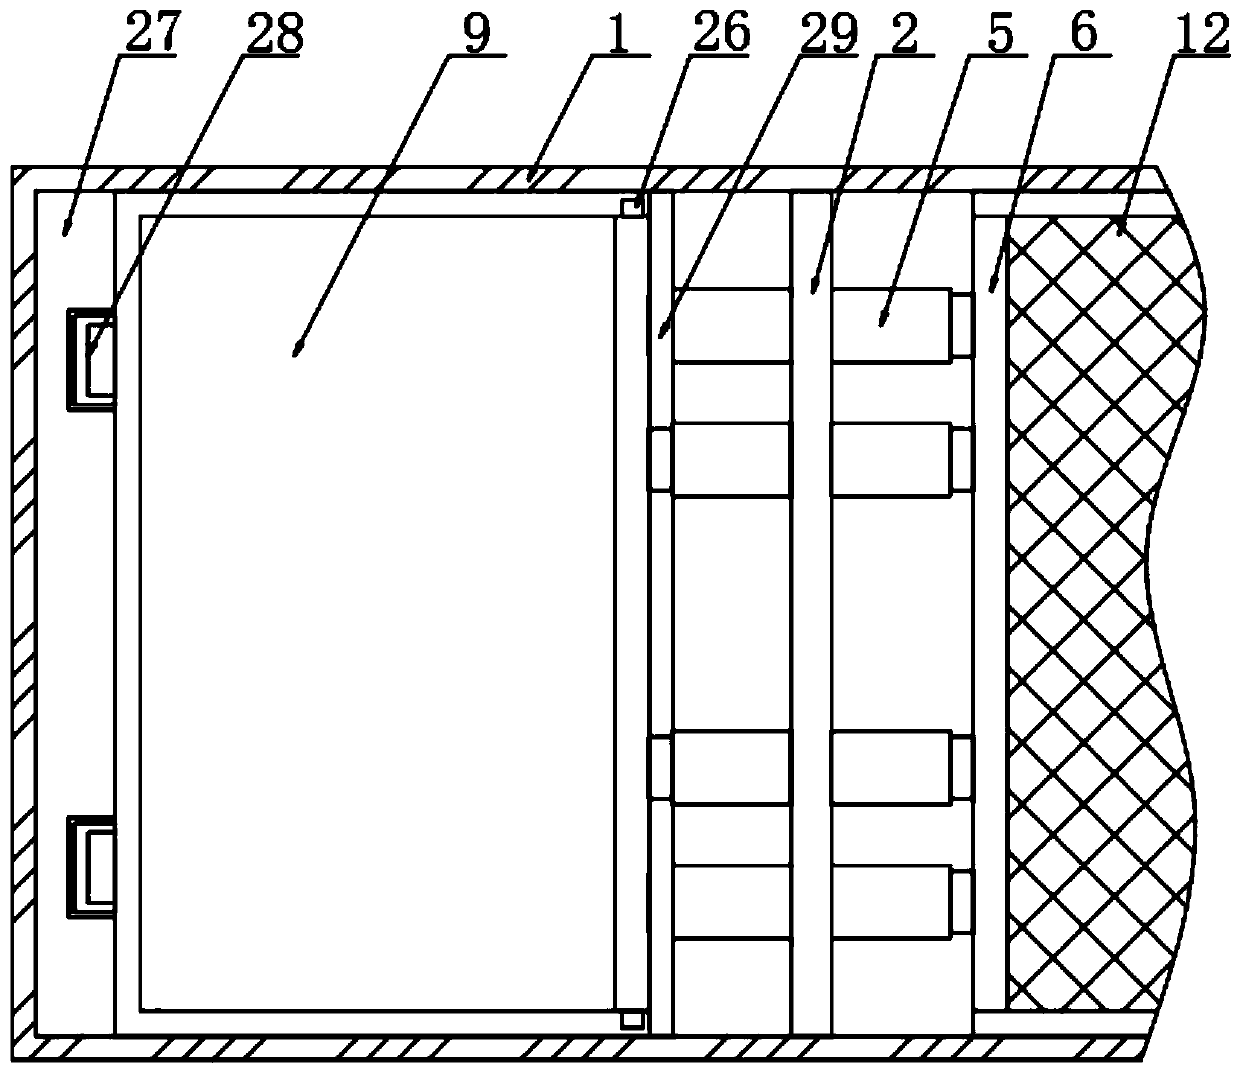 Containerization treatment case for environmental protection engineering